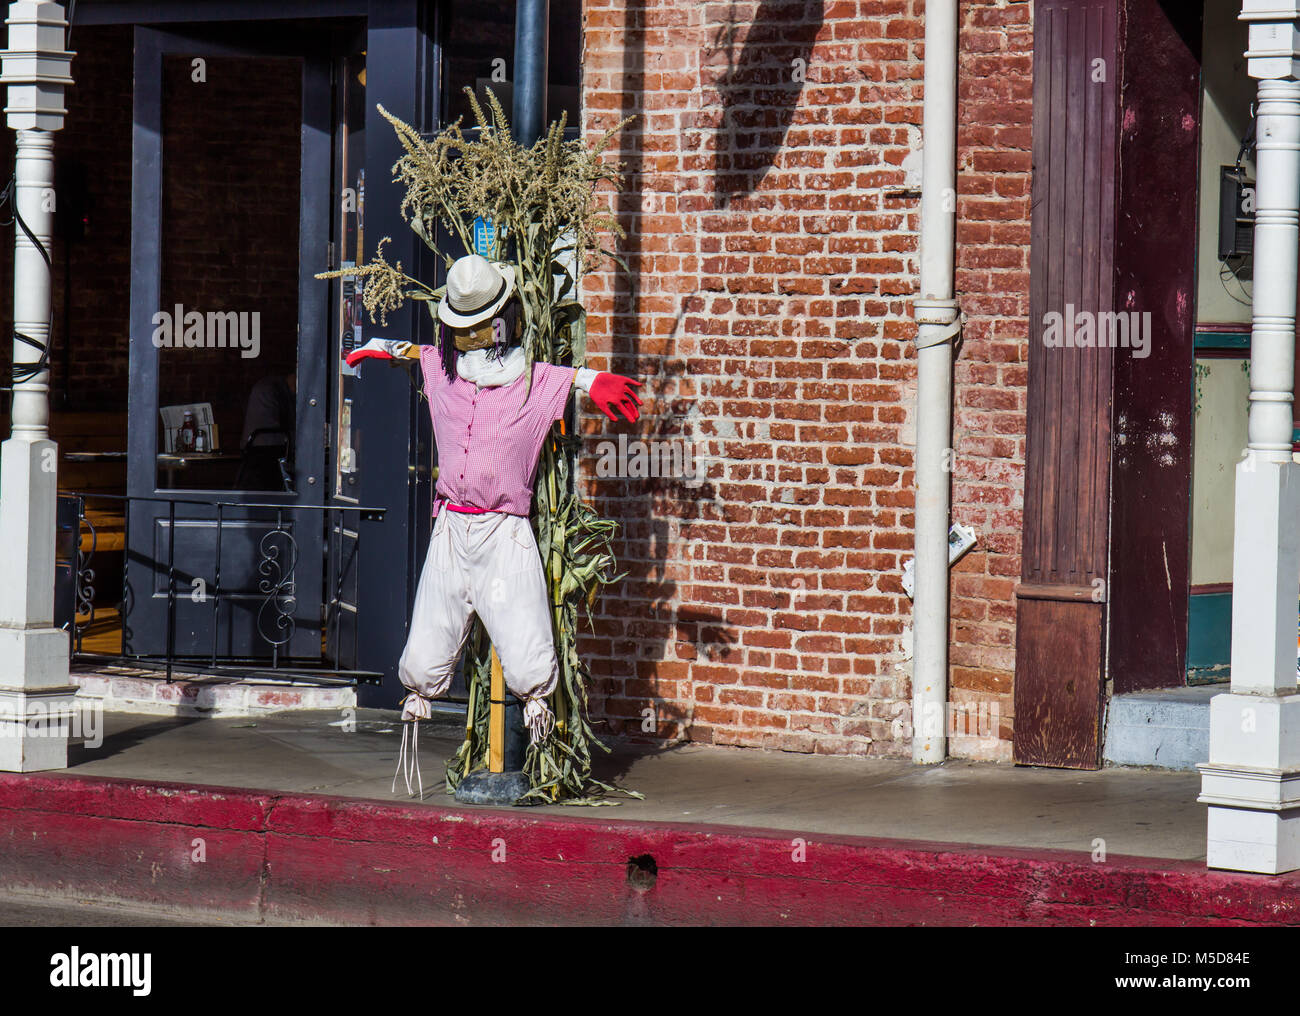 Halloween Scarecrow Decorating Street Post In Small Town Stock Photo